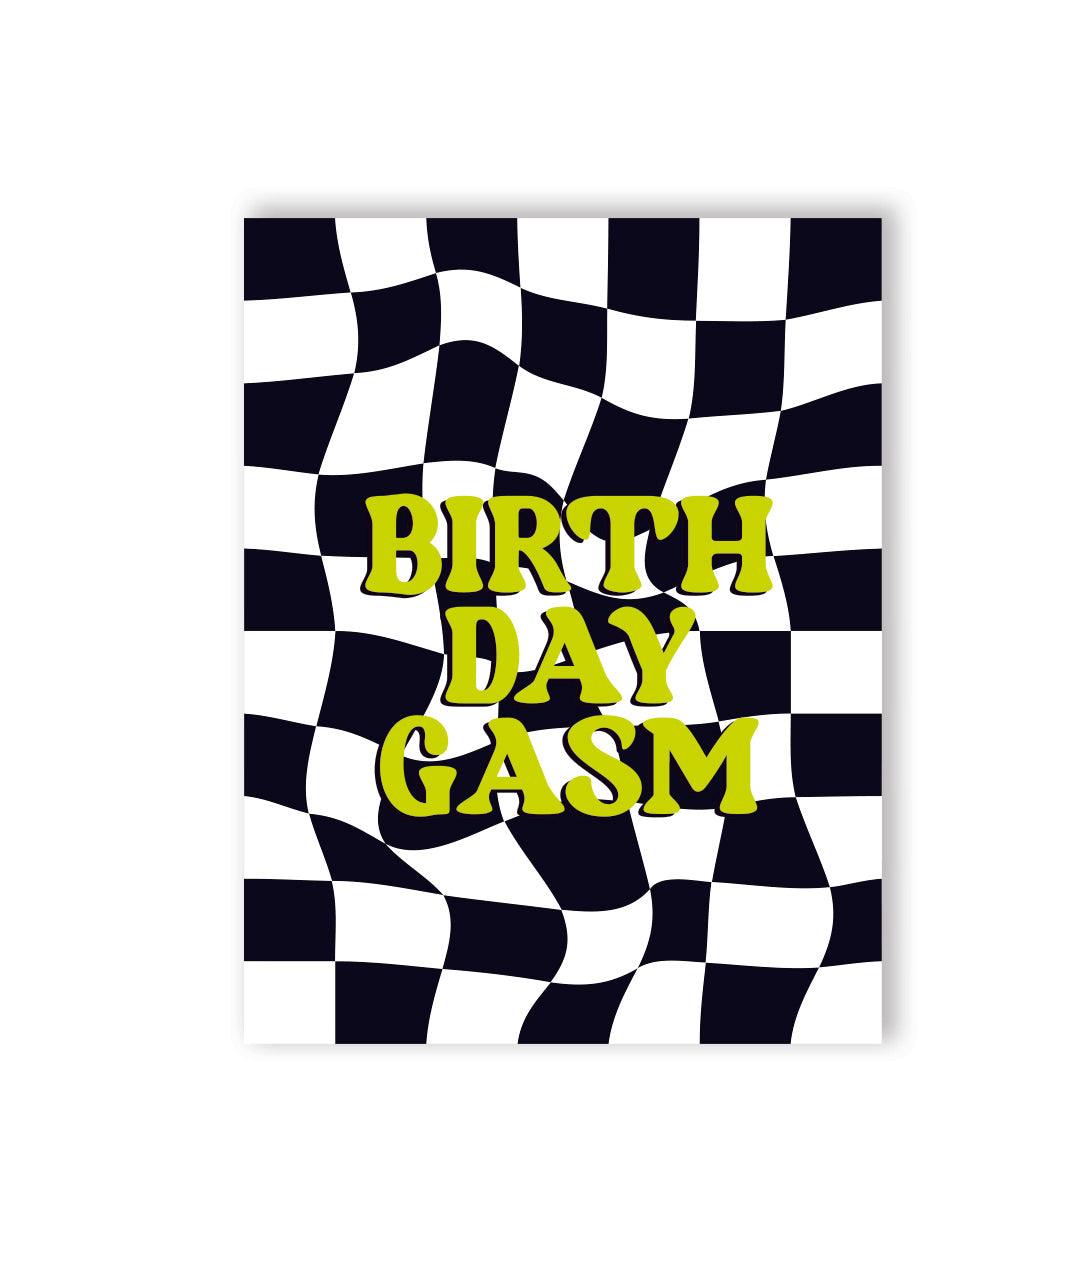 The Birthday-Gasm Naughty Greeting Card features a black and white checkerboard flag background with the text "BIRTHDAY GASM" written in an uppercase lime green text